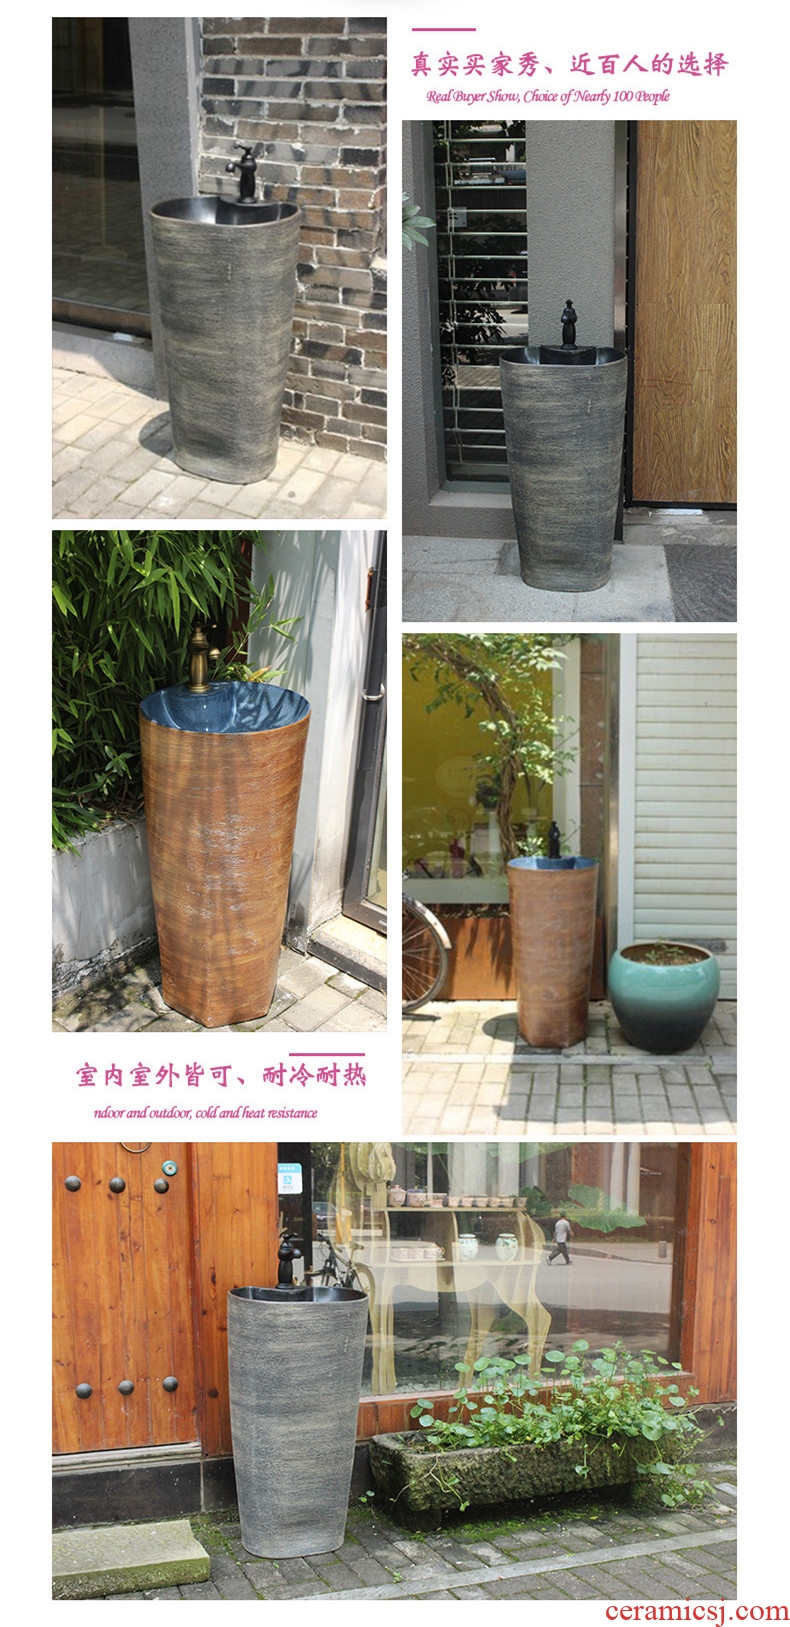 Floor type restoring ancient ways home pillar basin sinks one is suing garden ceramic lavabo archaize is suing the balcony